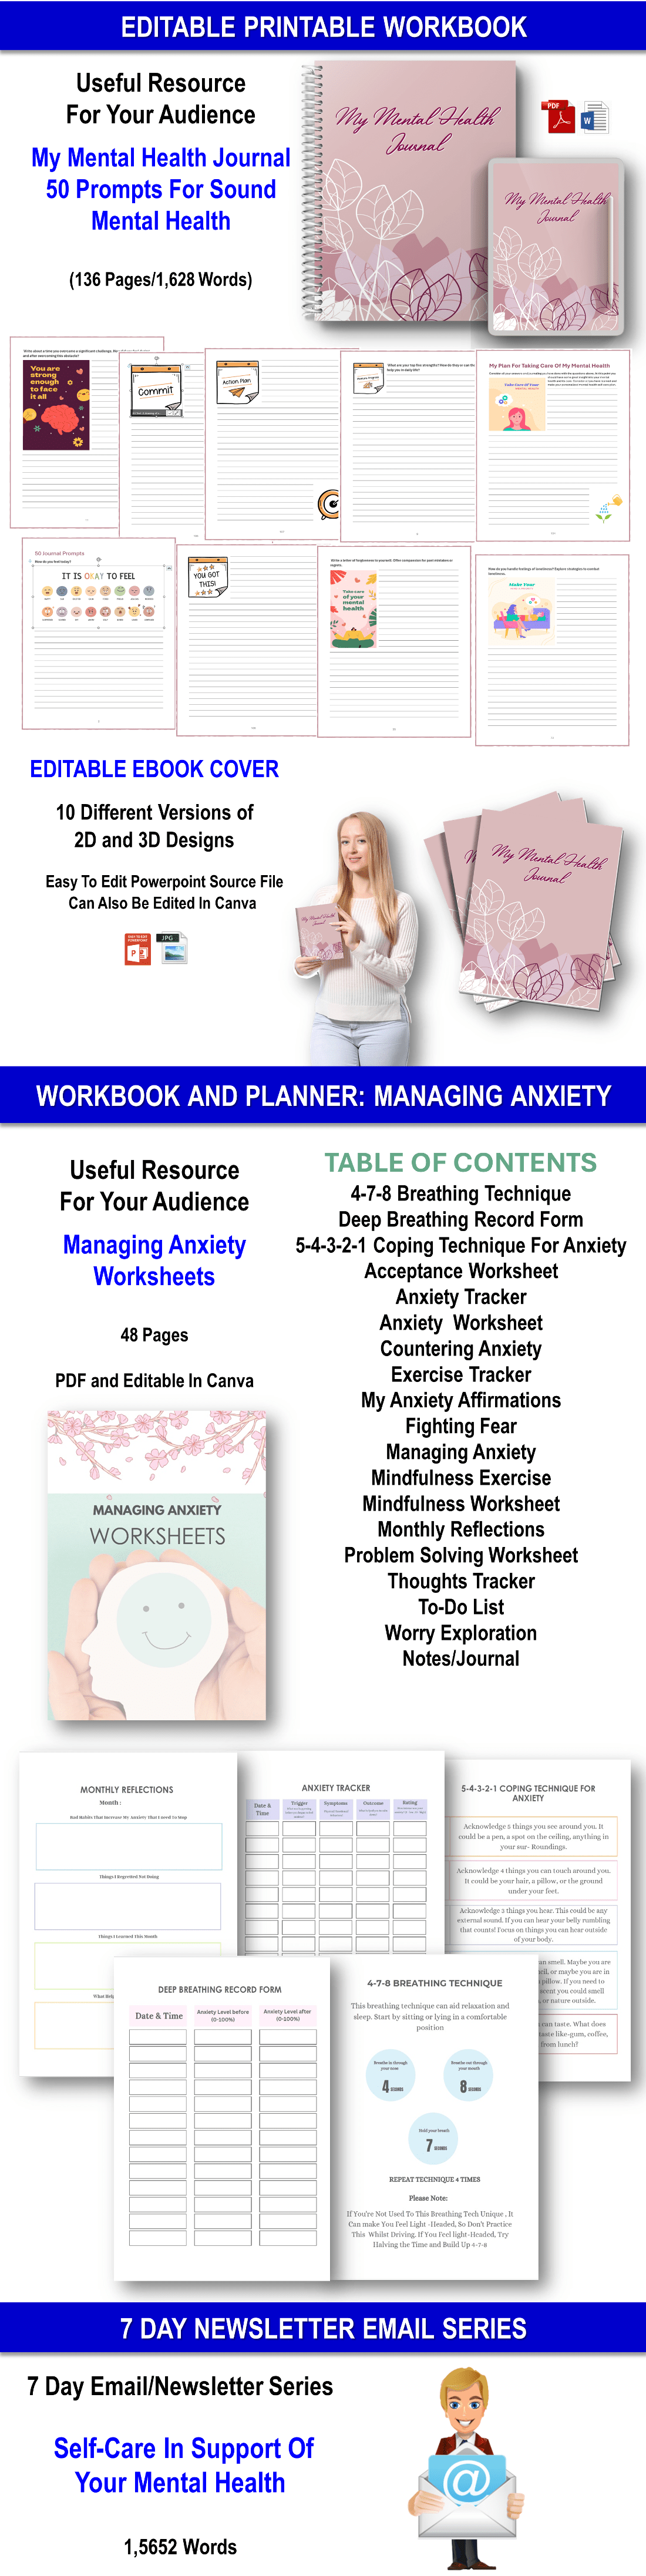 Self-Care Plan For Mental Health - 101 Activities, Hobbies And Life Choices That Support And Boost Mental Health Content Pack with PLR Rights